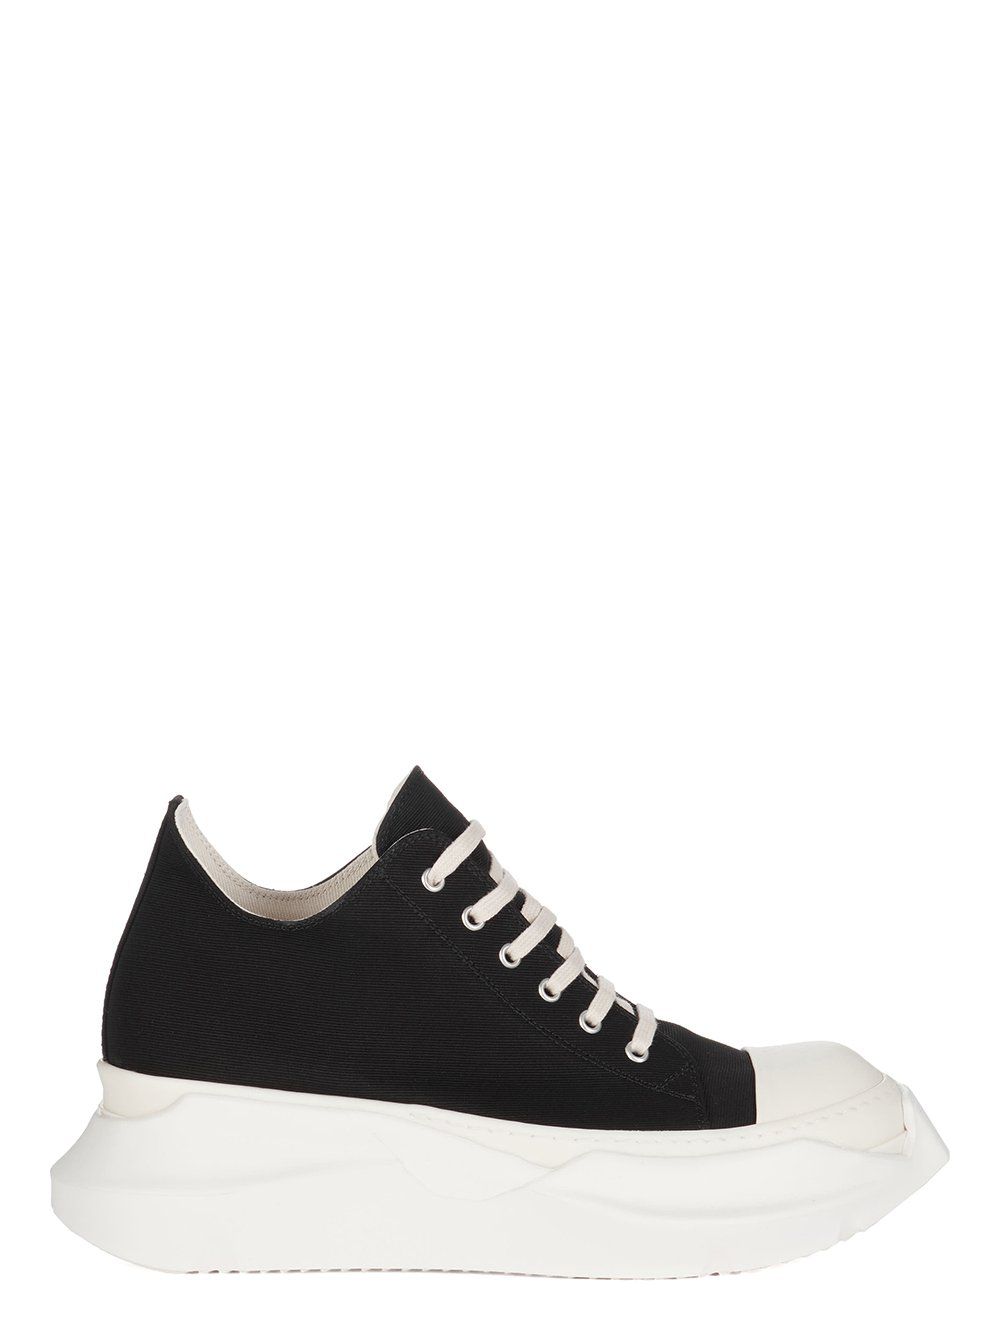 24SS Rick Owens Drkshdw Low-Top Abstractよろしくお願いいたします